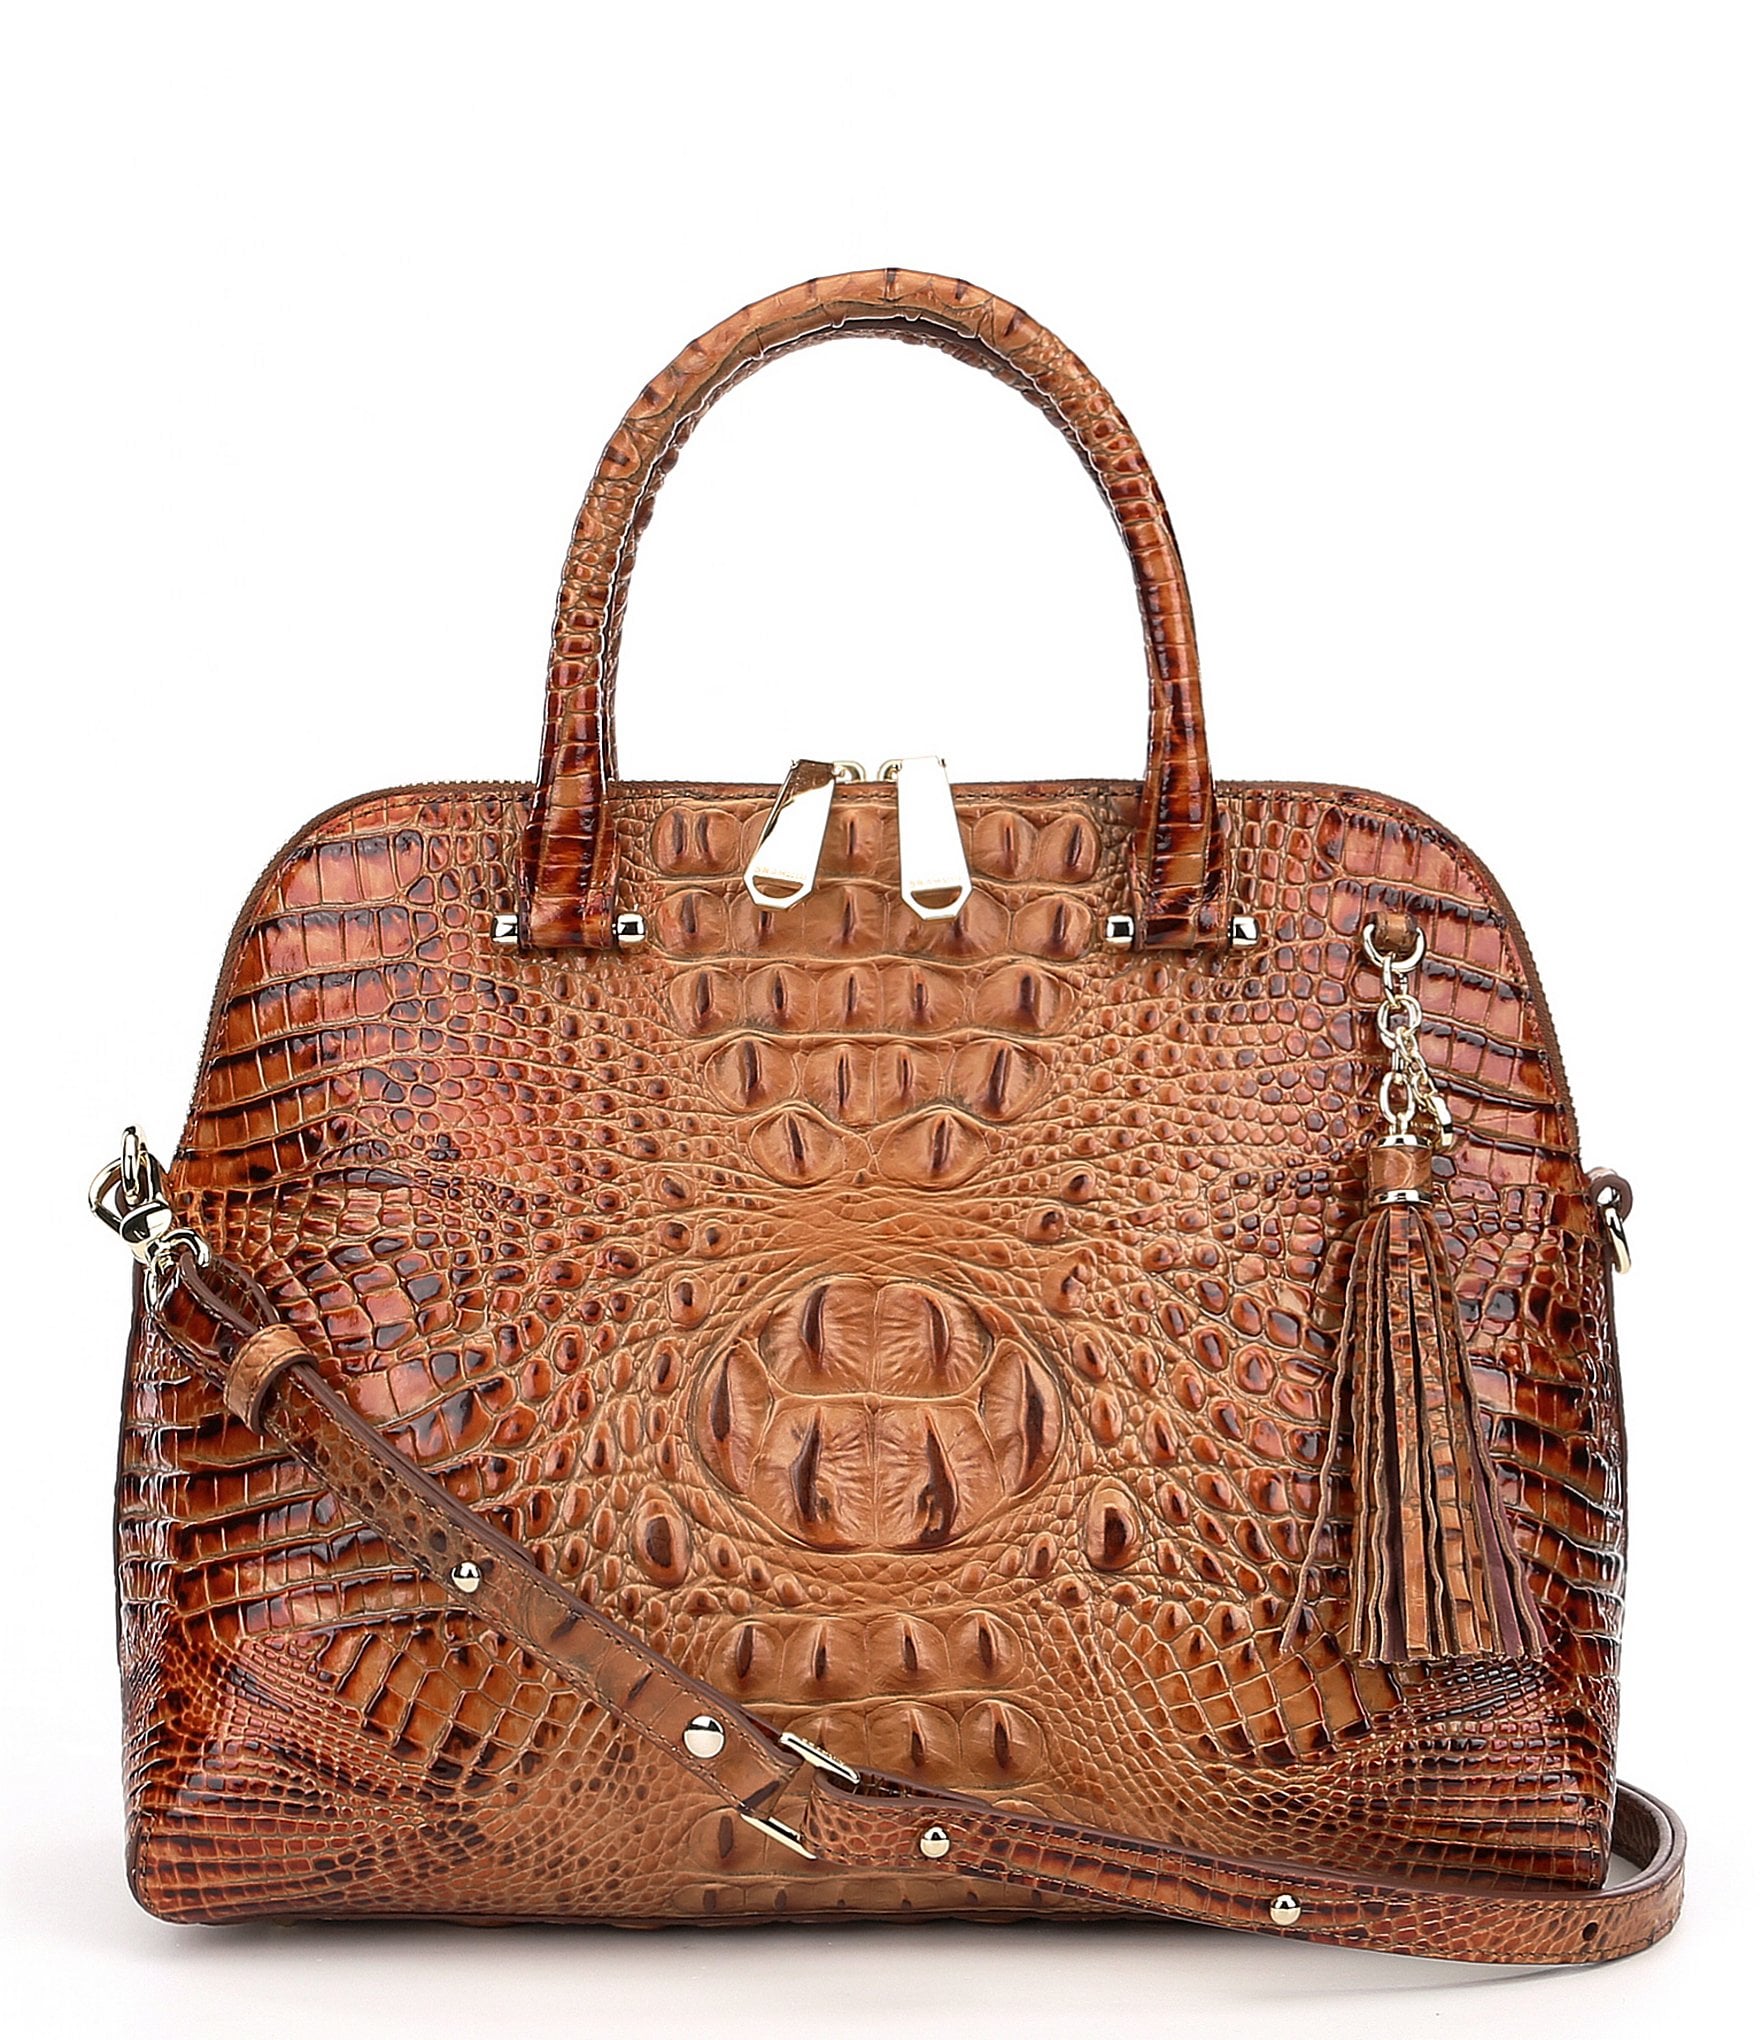 Dillards Brahmin Purses On Sale | Confederated Tribes of the Umatilla Indian Reservation